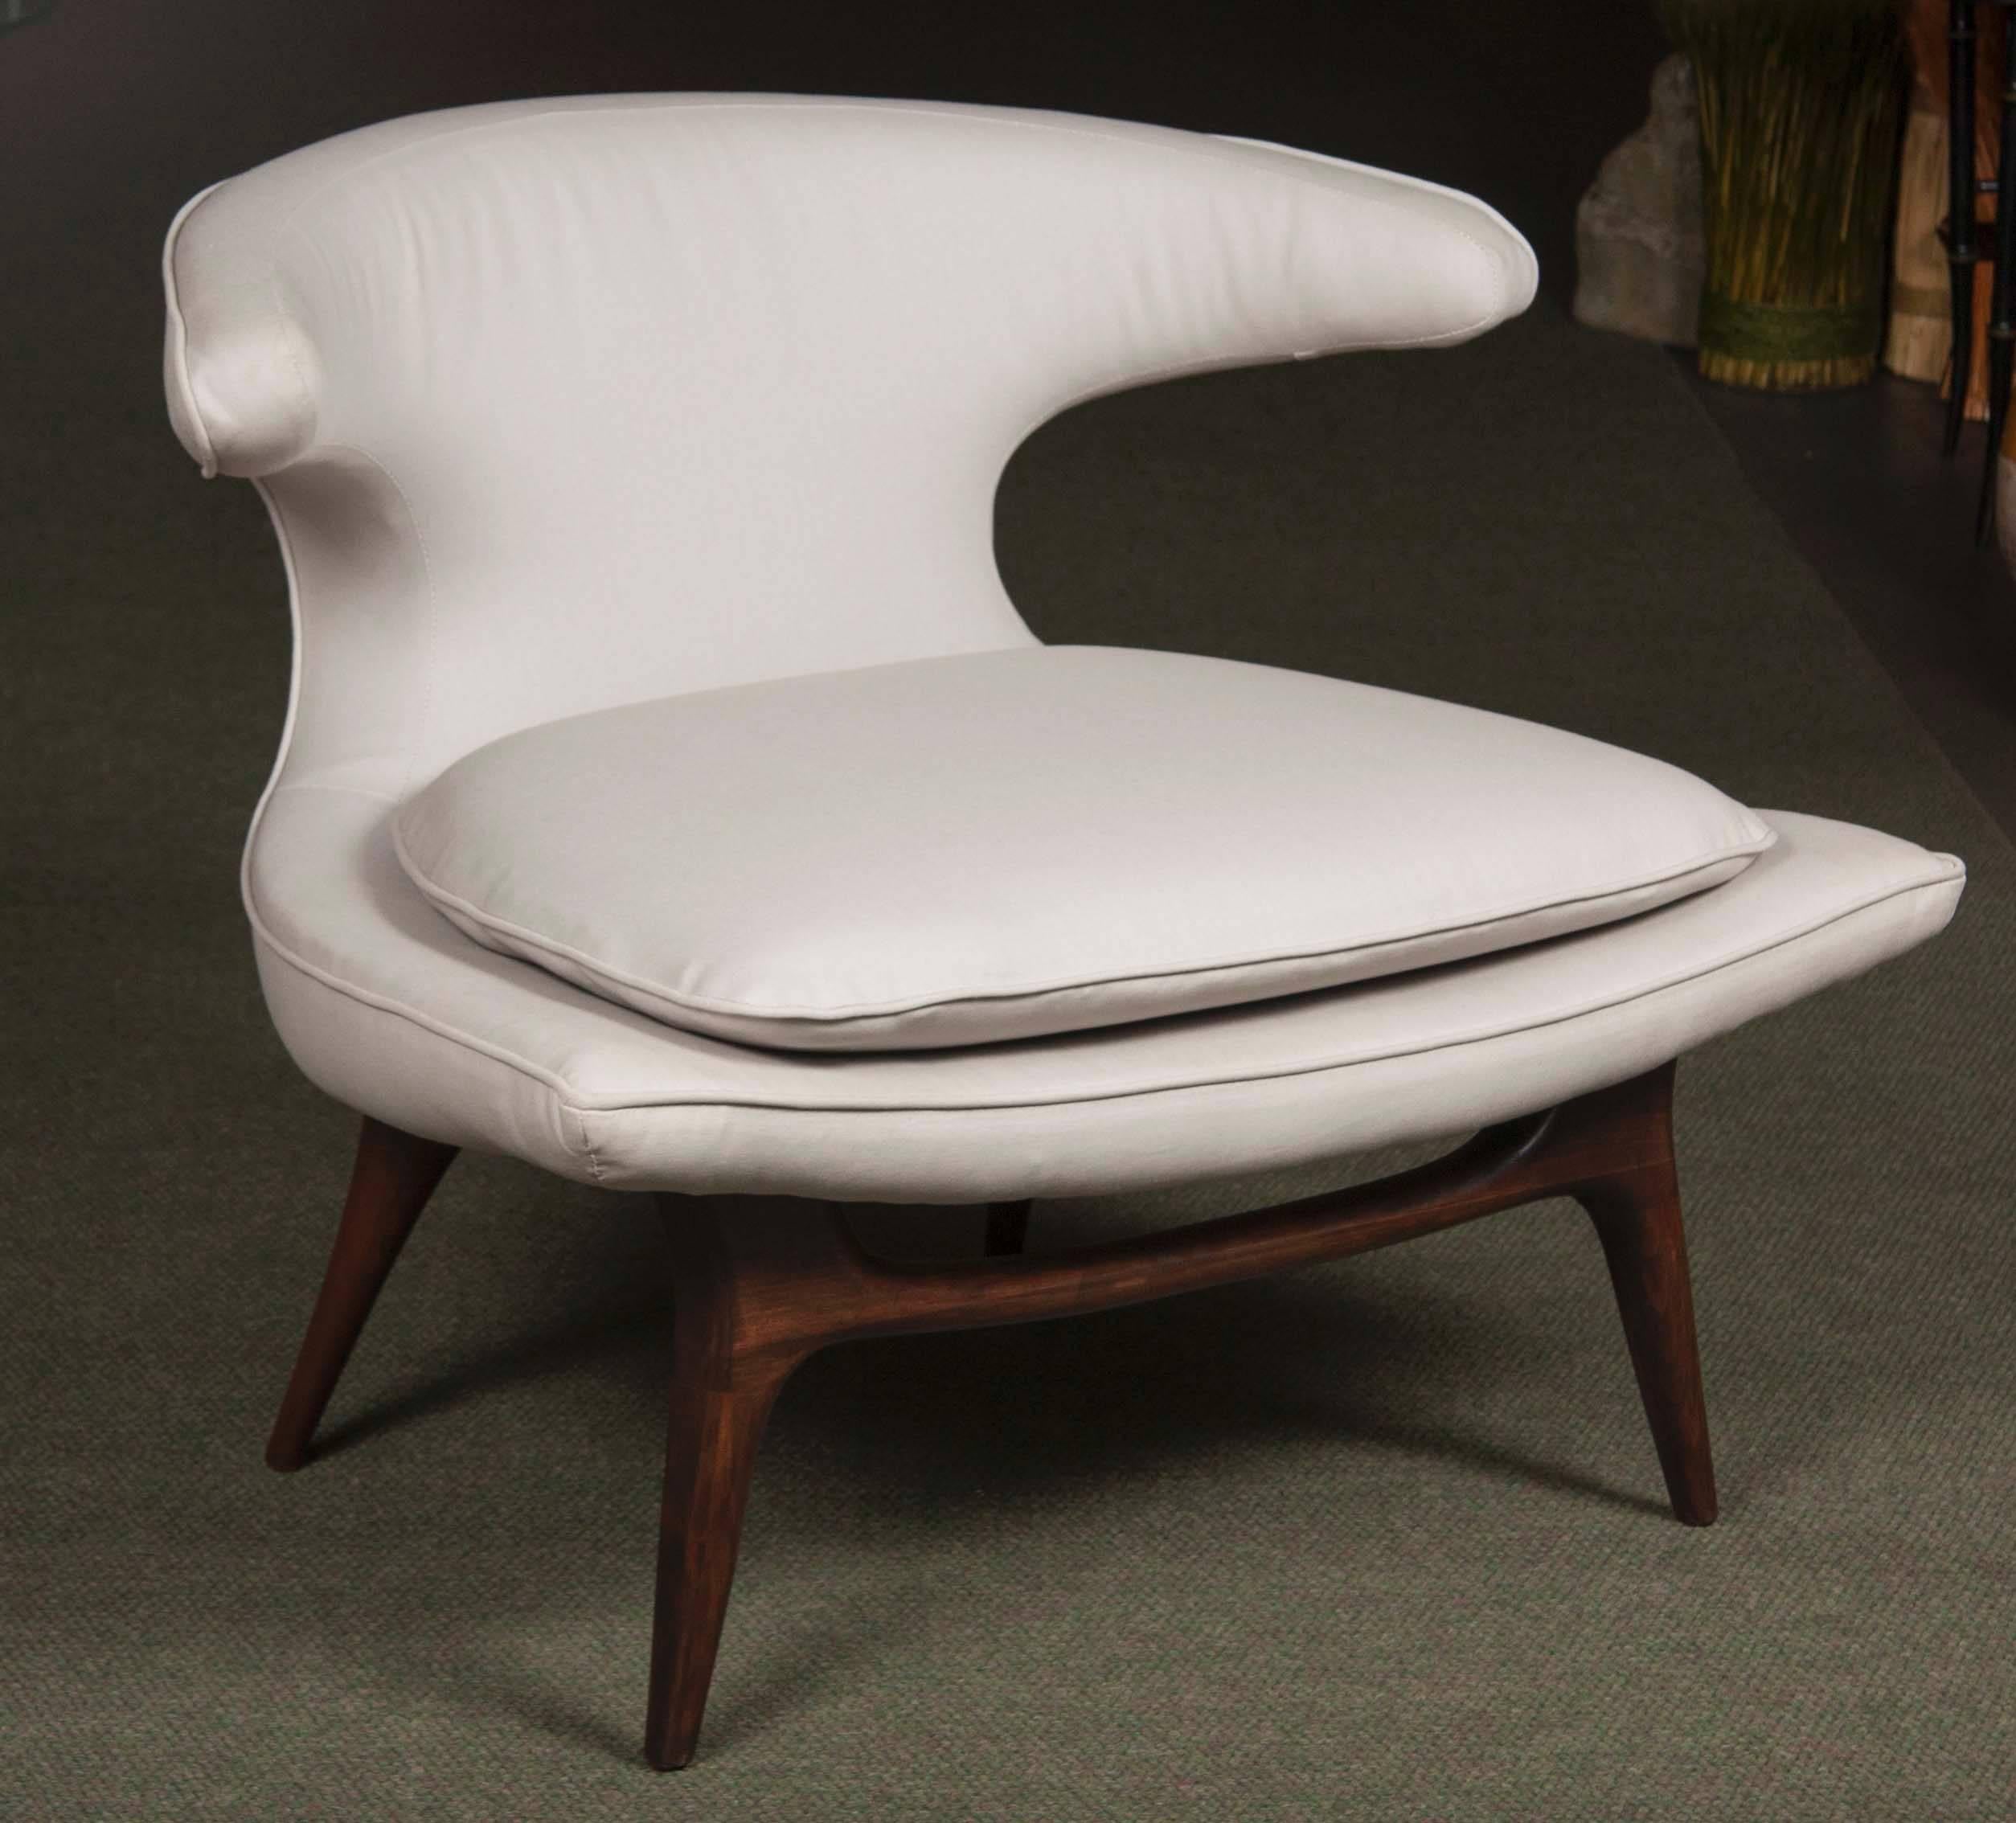 A fantastic Mid-Century lounge chair designed by Karpen of California. The 'Horn' lounge chair is the best and most iconic chair designed by Karpen. The chair has a low and wide sculpted seat which curves into the back as well as curving around on